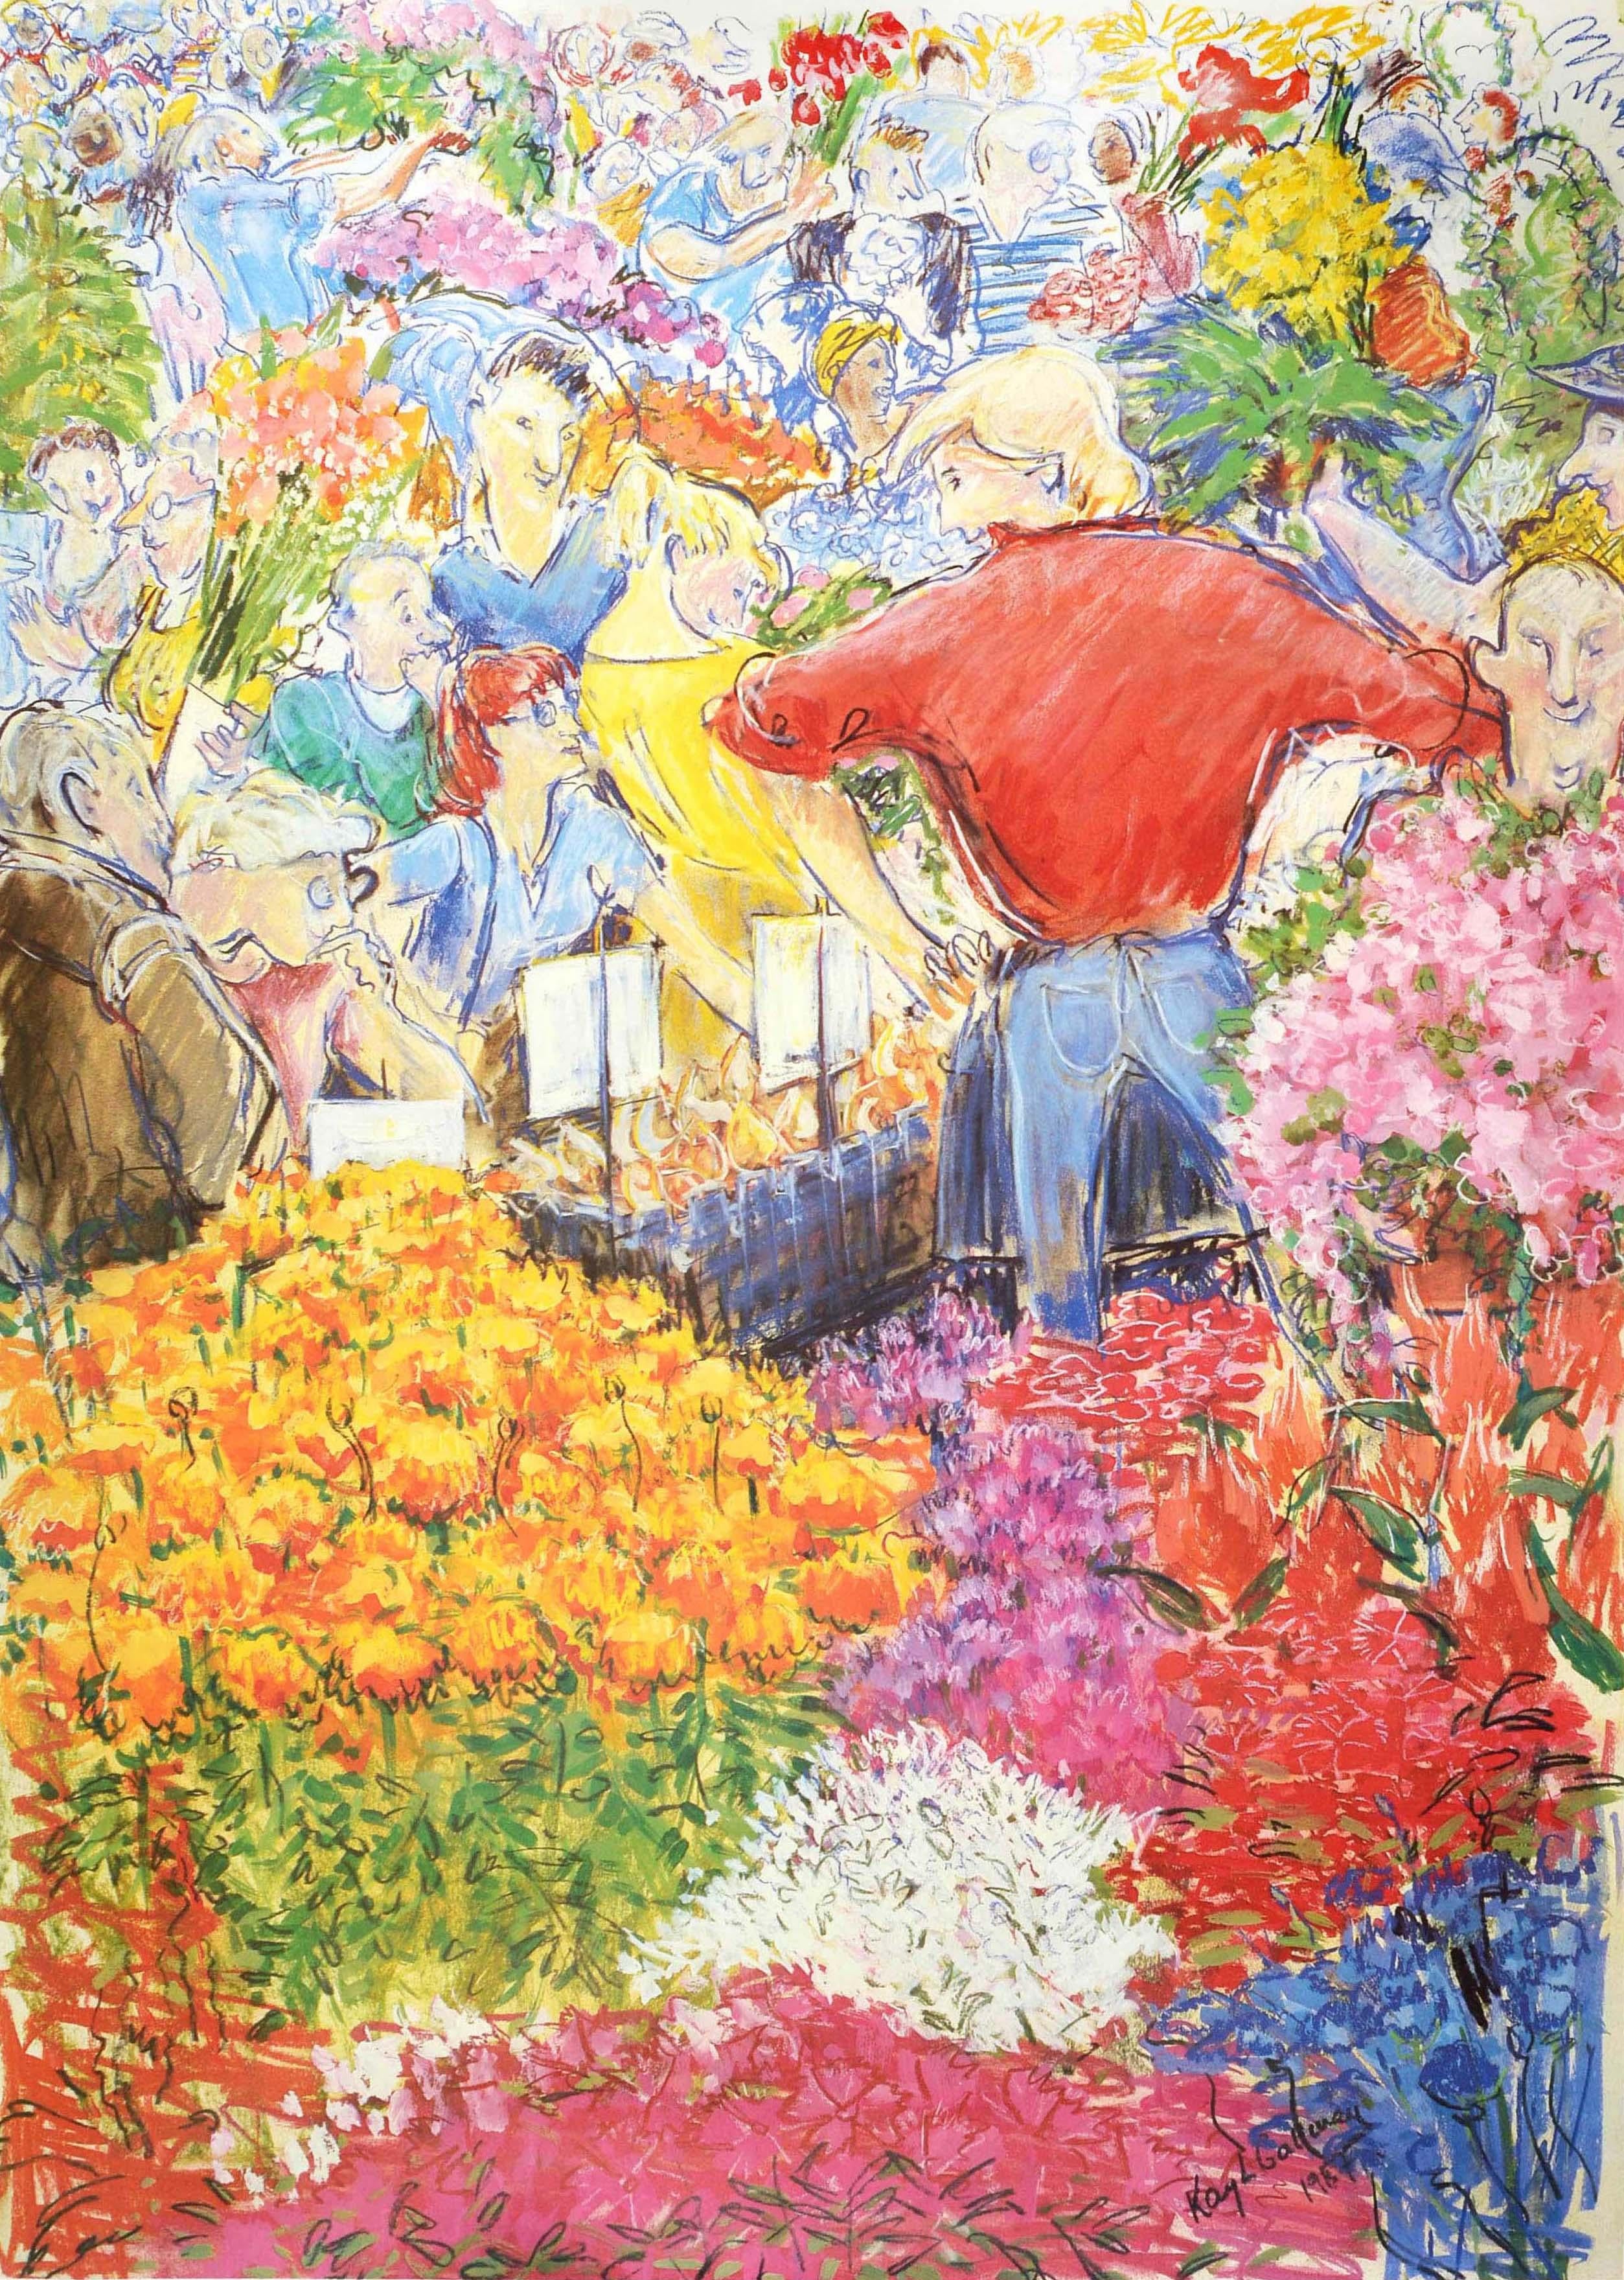 Original vintage London Underground poster - The Flower Market by Tube Sunday mornings at Columbia Road Shoreditch nearest stations Old Street, Shoreditch - featuring a colourful floral image showing a flower seller with people at the market and